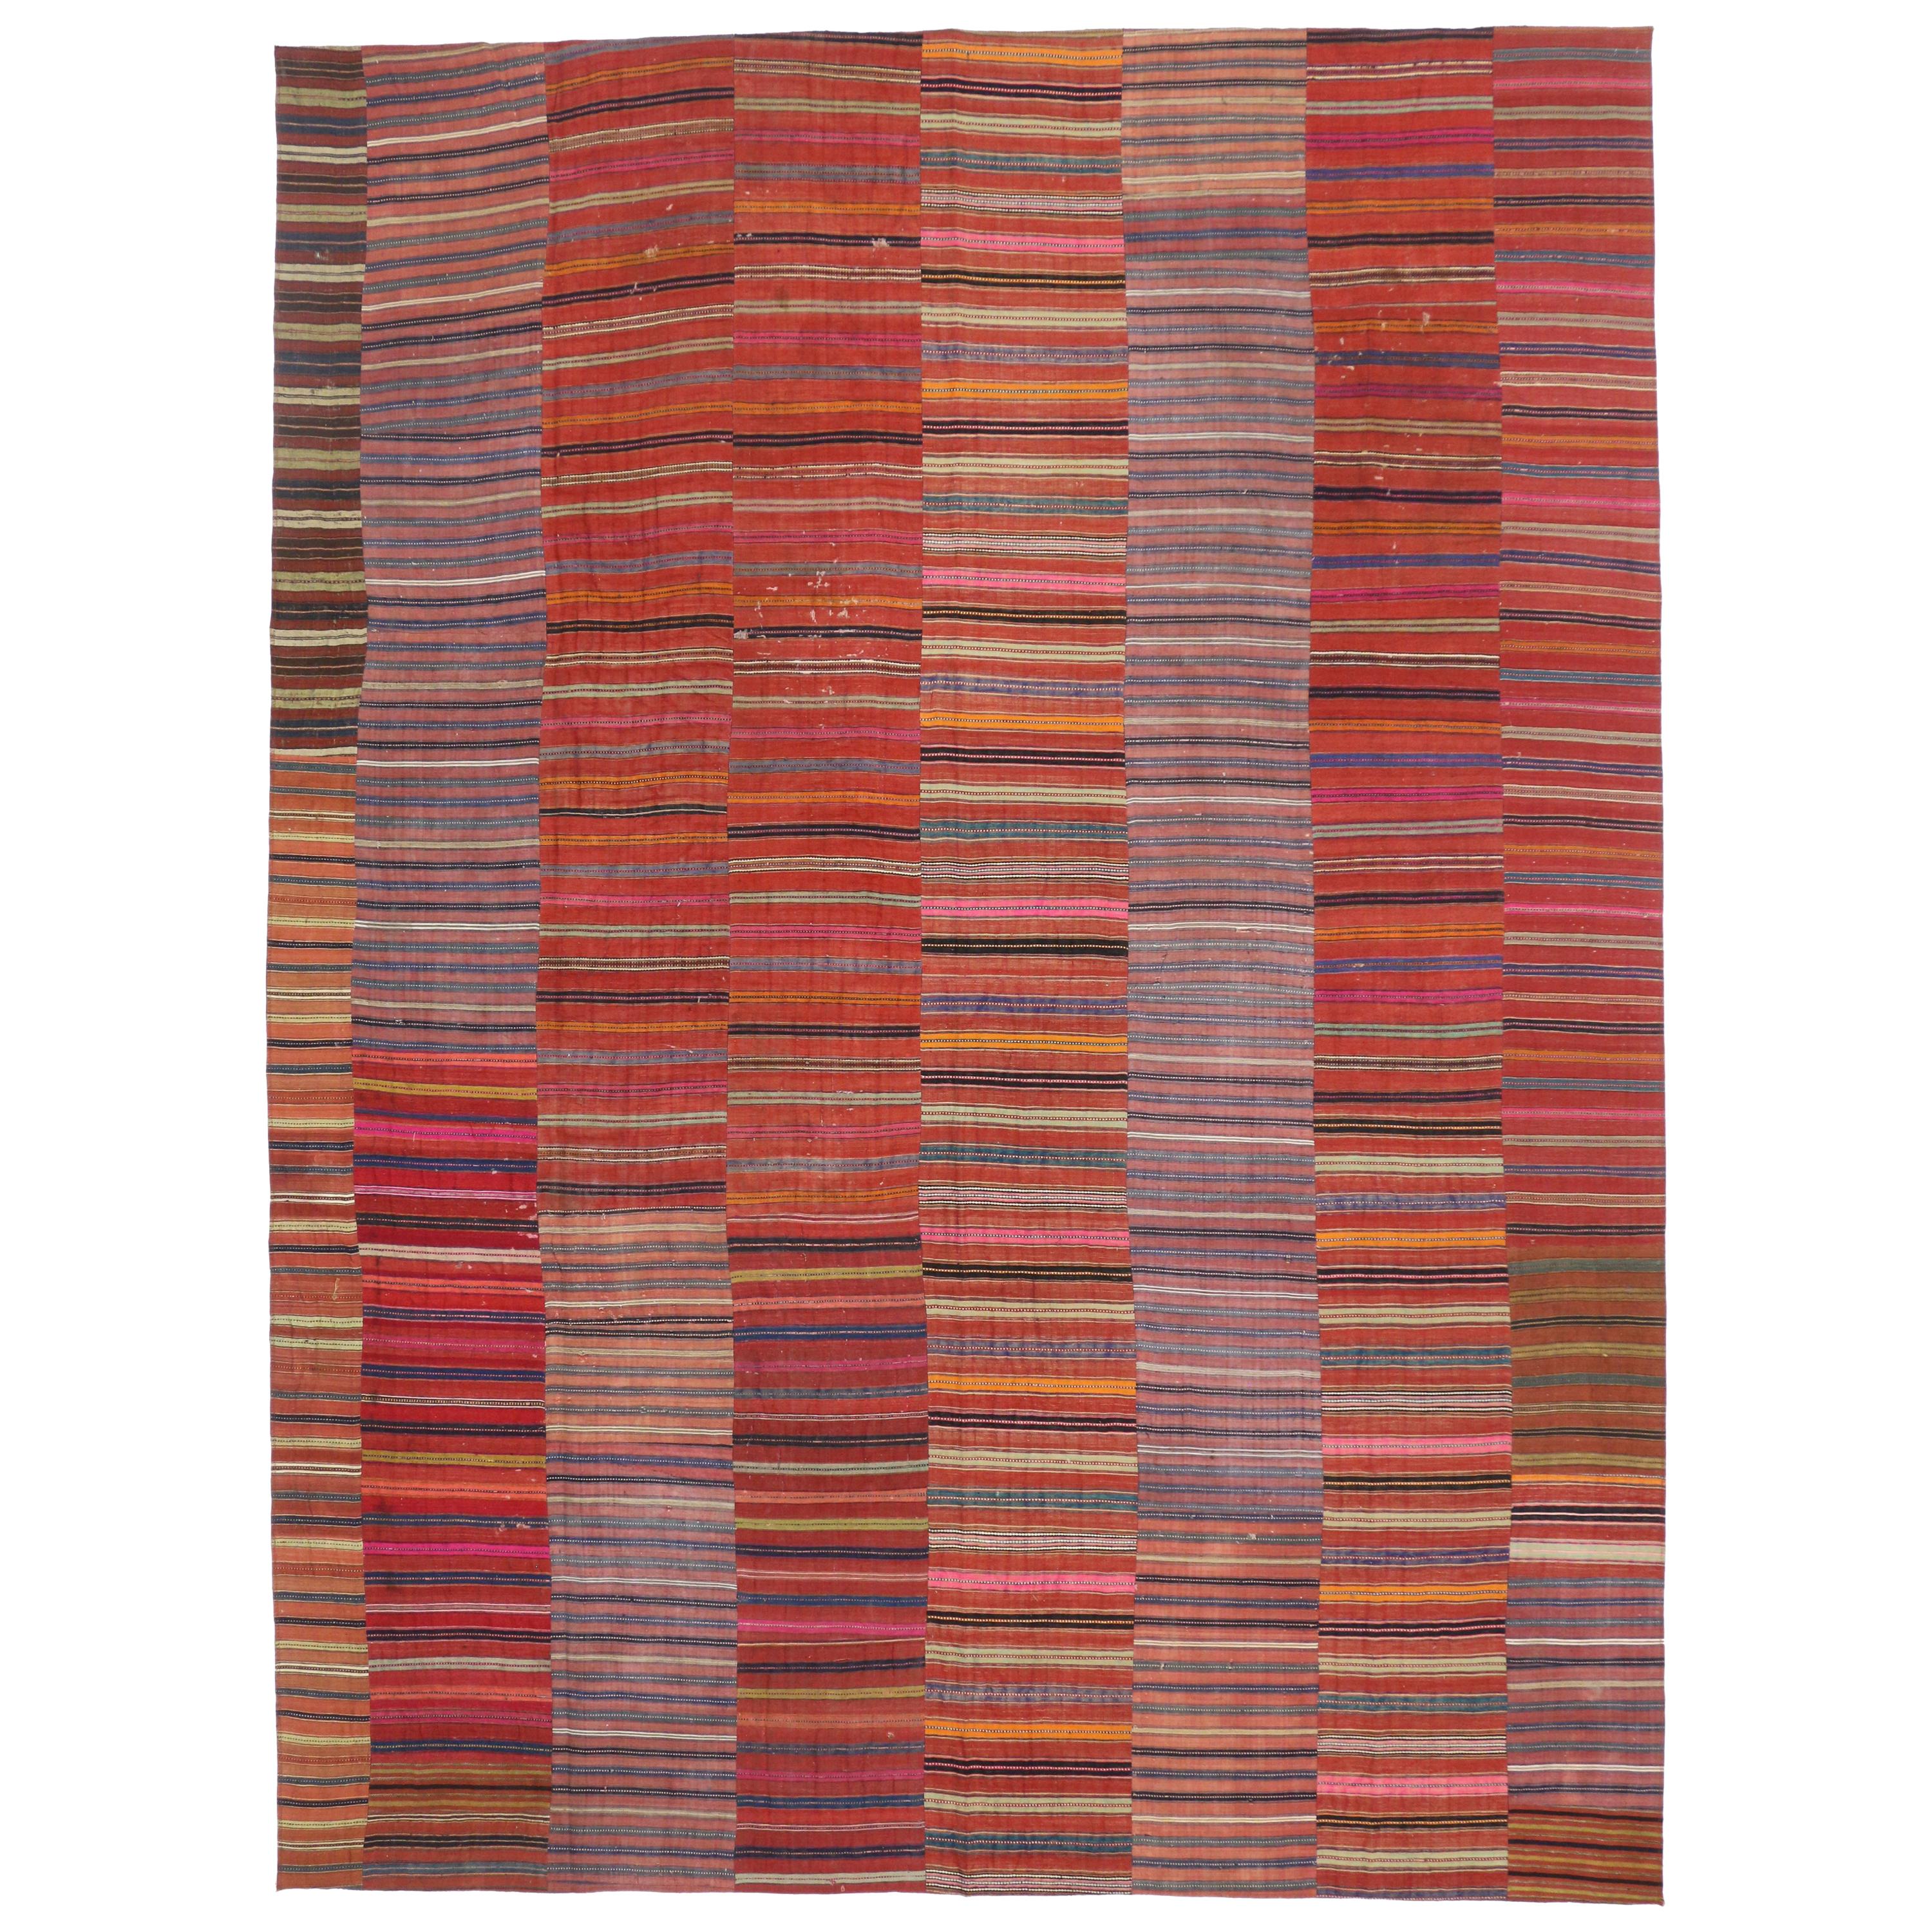 Distressed Vintage Turkish Striped Kilim Rug with Modern Rustic Cabin Style